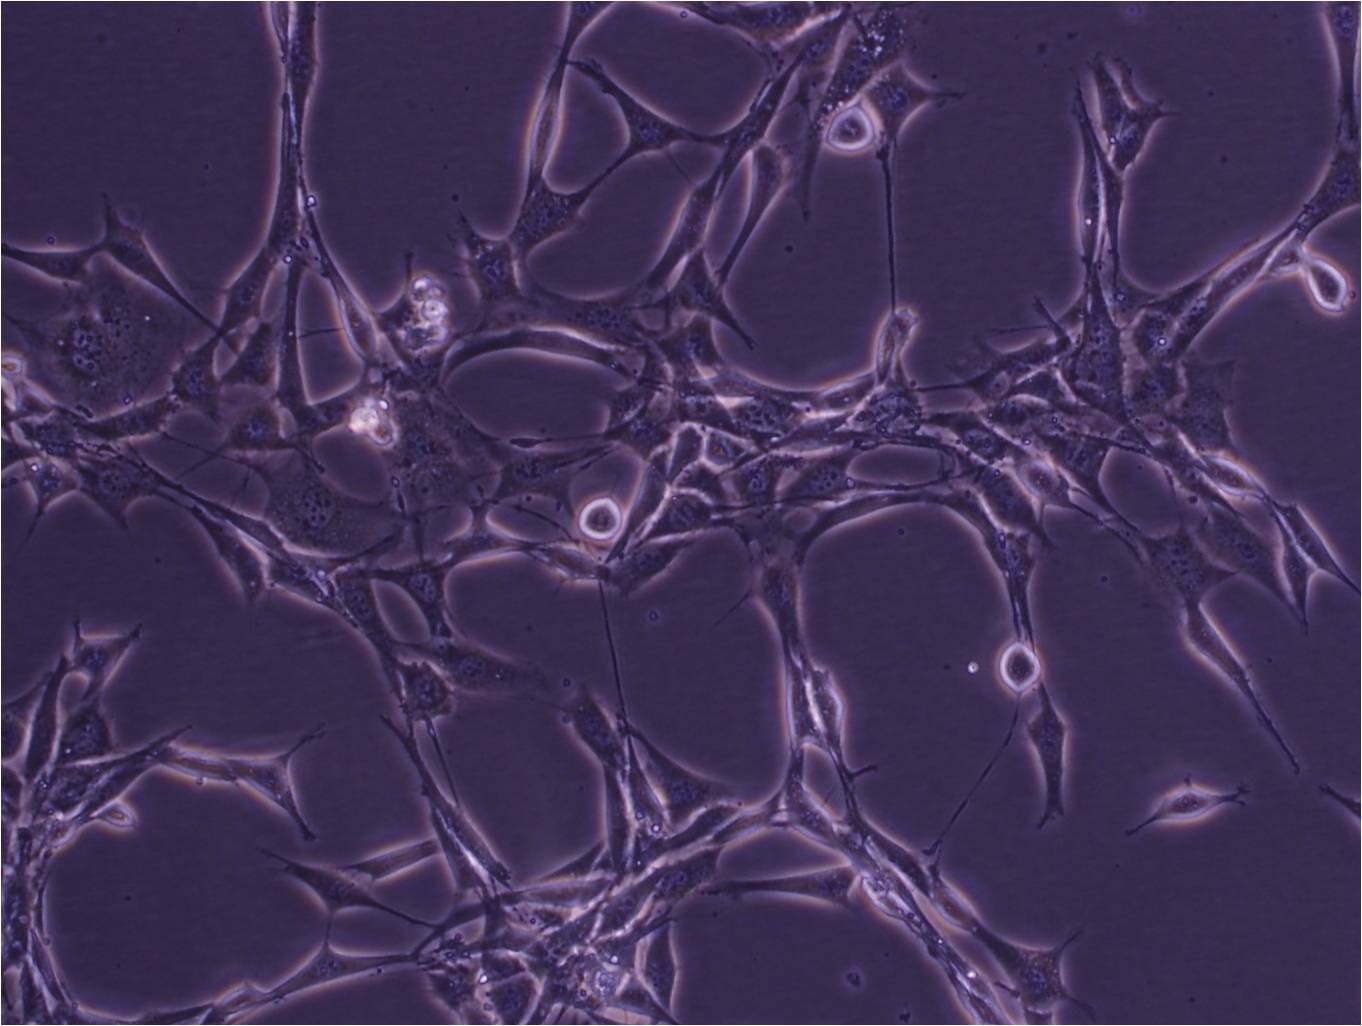 MLO-Y4 cell line小鼠骨样细胞系,MLO-Y4 cell line